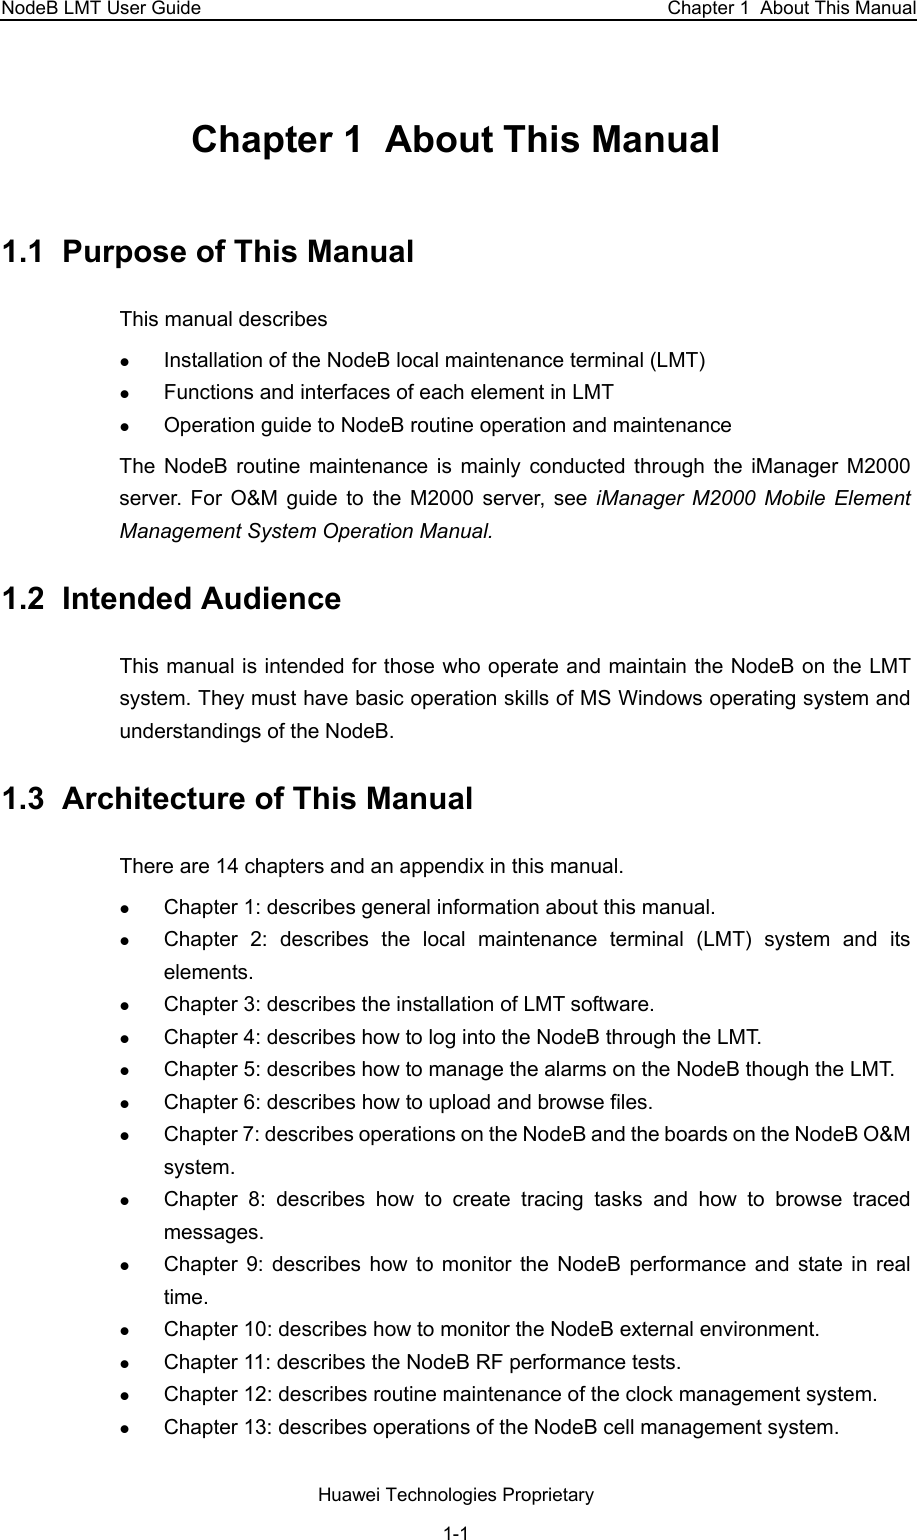 NodeB LMT User Guide   Chapter 1  About This Manual Chapter 1  About This Manual  1.1  Purpose of This Manual This manual describes z Installation of the NodeB local maintenance terminal (LMT) z Functions and interfaces of each element in LMT  z Operation guide to NodeB routine operation and maintenance The NodeB routine maintenance is mainly conducted through the iManager M2000 server. For O&amp;M guide to the M2000 server, see iManager M2000 Mobile Element Management System Operation Manual. 1.2  Intended Audience This manual is intended for those who operate and maintain the NodeB on the LMT system. They must have basic operation skills of MS Windows operating system and understandings of the NodeB.  1.3  Architecture of This Manual  There are 14 chapters and an appendix in this manual.  z Chapter 1: describes general information about this manual.  z Chapter 2: describes the local maintenance terminal (LMT) system and its elements. z Chapter 3: describes the installation of LMT software.  z Chapter 4: describes how to log into the NodeB through the LMT.  z Chapter 5: describes how to manage the alarms on the NodeB though the LMT.  z Chapter 6: describes how to upload and browse files.  z Chapter 7: describes operations on the NodeB and the boards on the NodeB O&amp;M system.  z Chapter 8: describes how to create tracing tasks and how to browse traced messages.  z Chapter 9: describes how to monitor the NodeB performance and state in real time.  z Chapter 10: describes how to monitor the NodeB external environment. z Chapter 11: describes the NodeB RF performance tests. z Chapter 12: describes routine maintenance of the clock management system.  z Chapter 13: describes operations of the NodeB cell management system.  Huawei Technologies Proprietary 1-1 